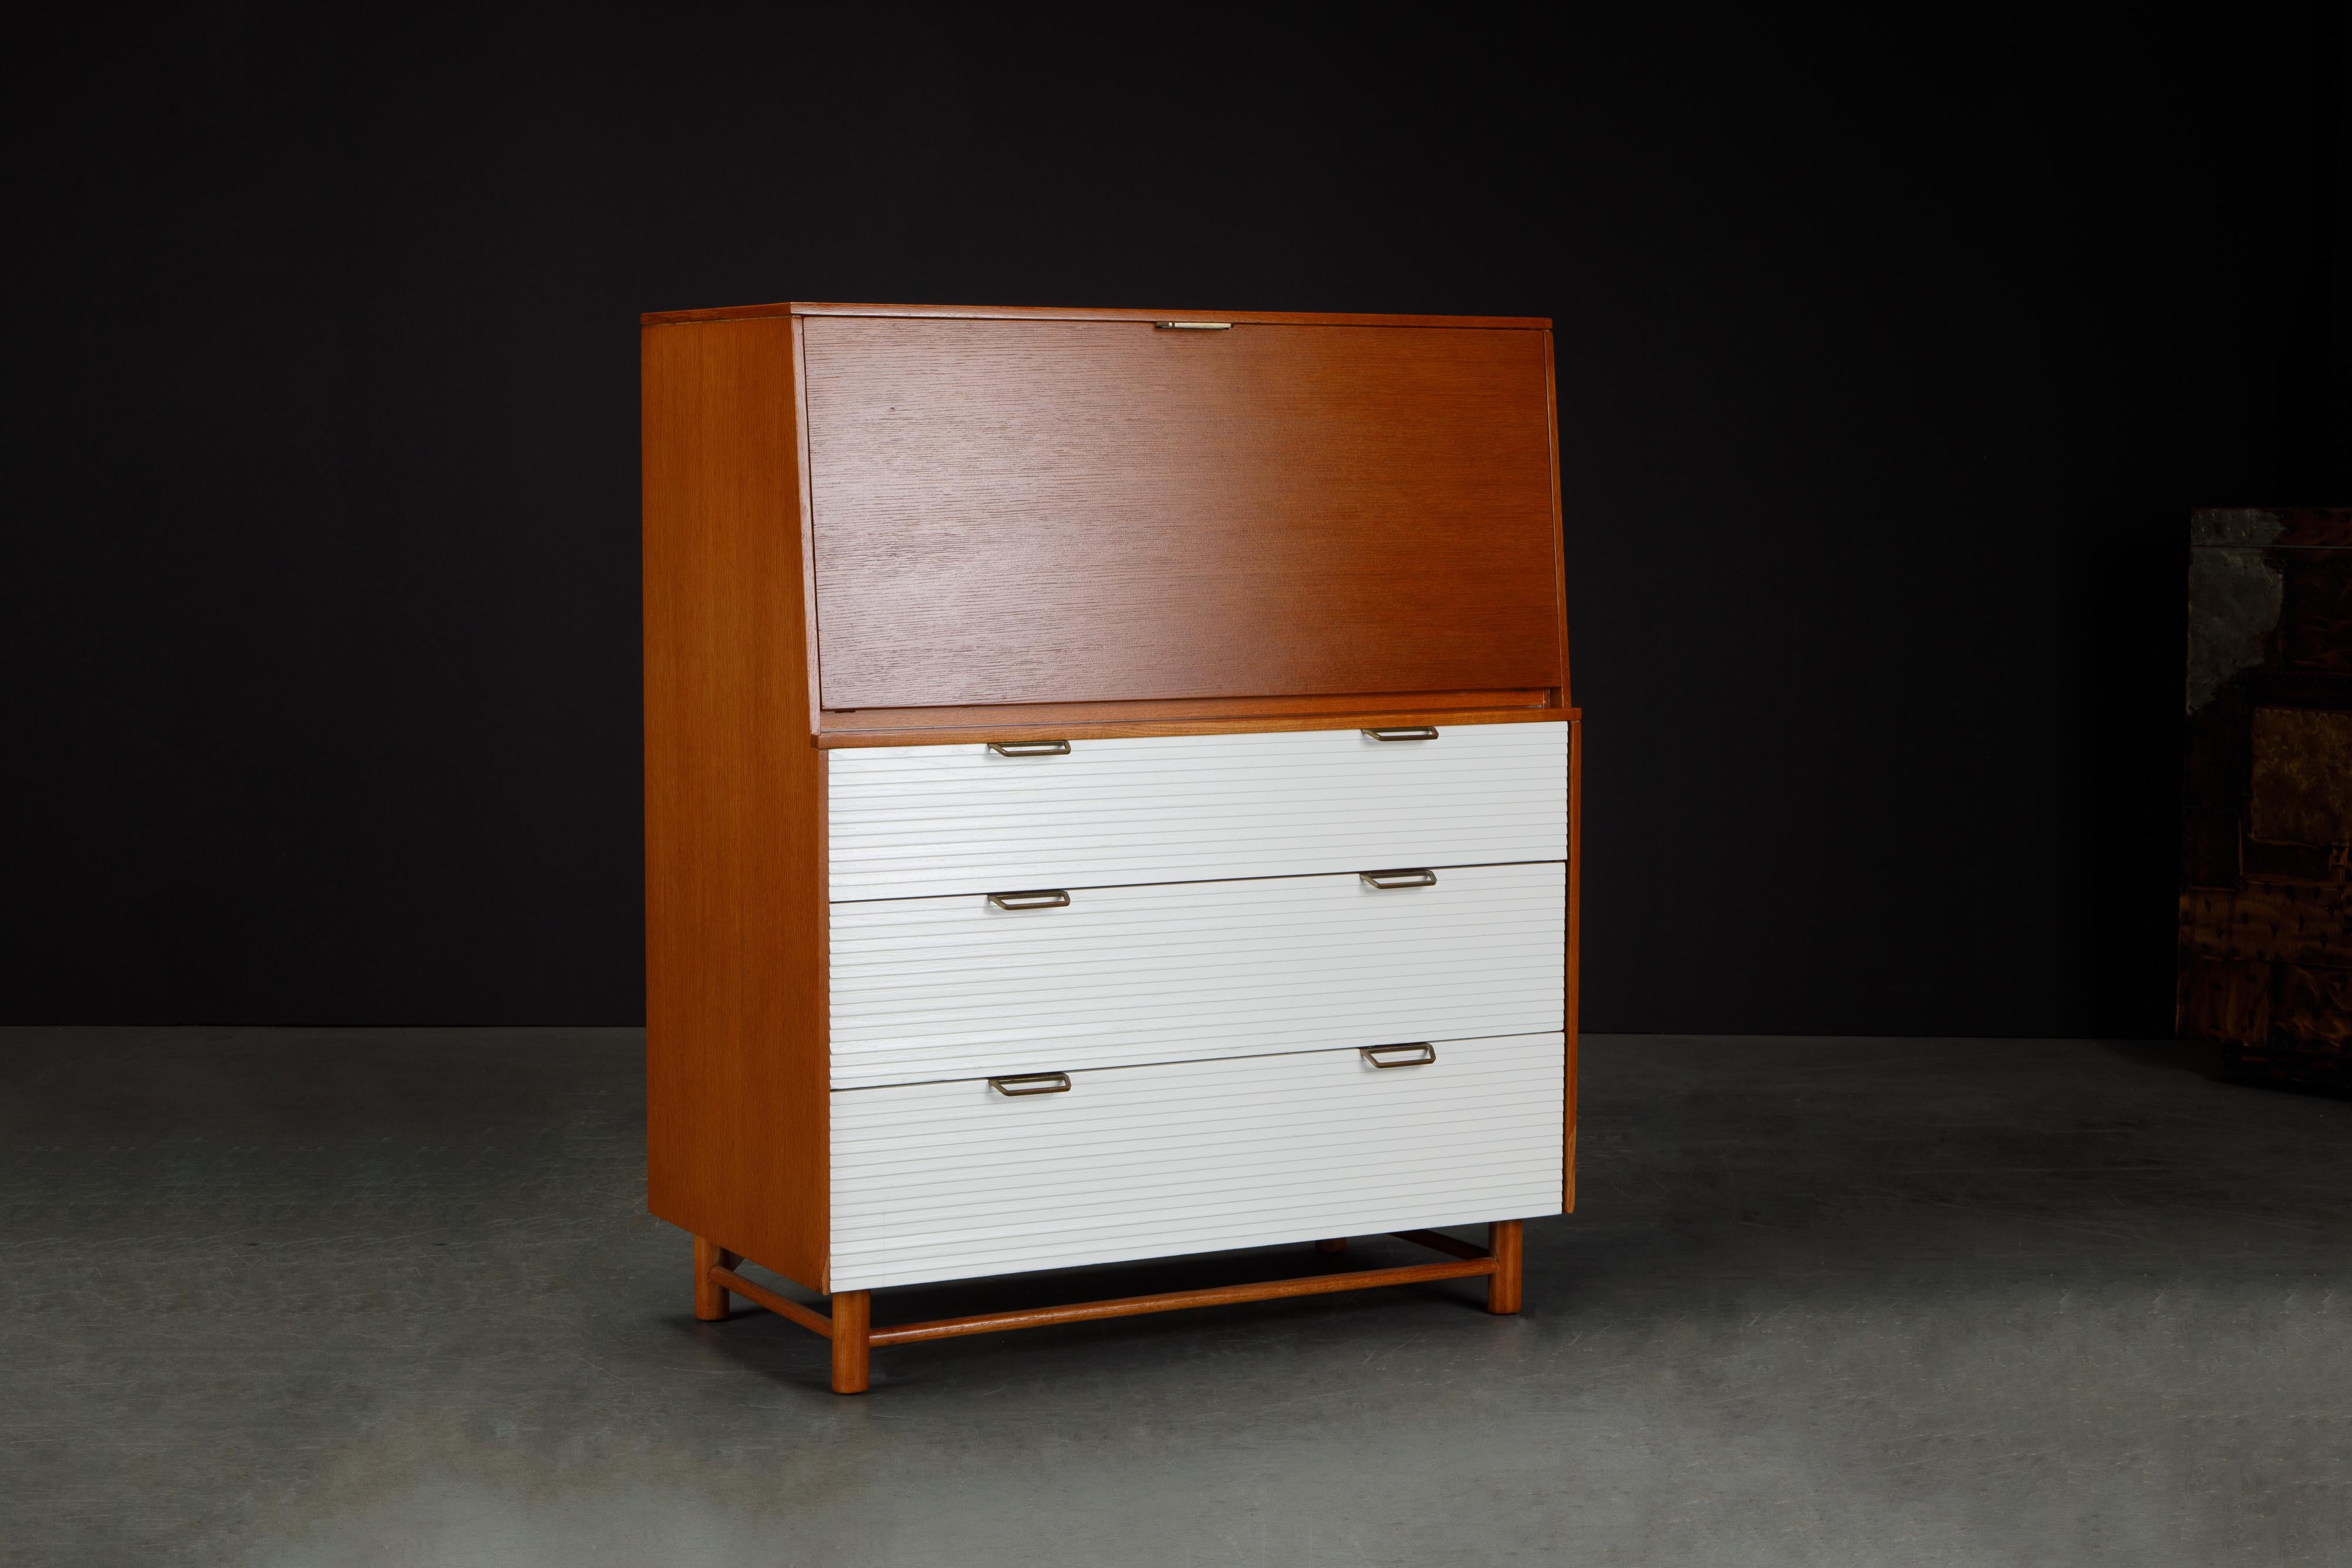 A desirable and rare fully restored highboy secretary dresser by Raymond Loewy for Mengel, circa 1955, comprised of a drop-front secretary with pullout / pull-out storage drawer, cubbies, desktop surface and illuminated with an interior light, and